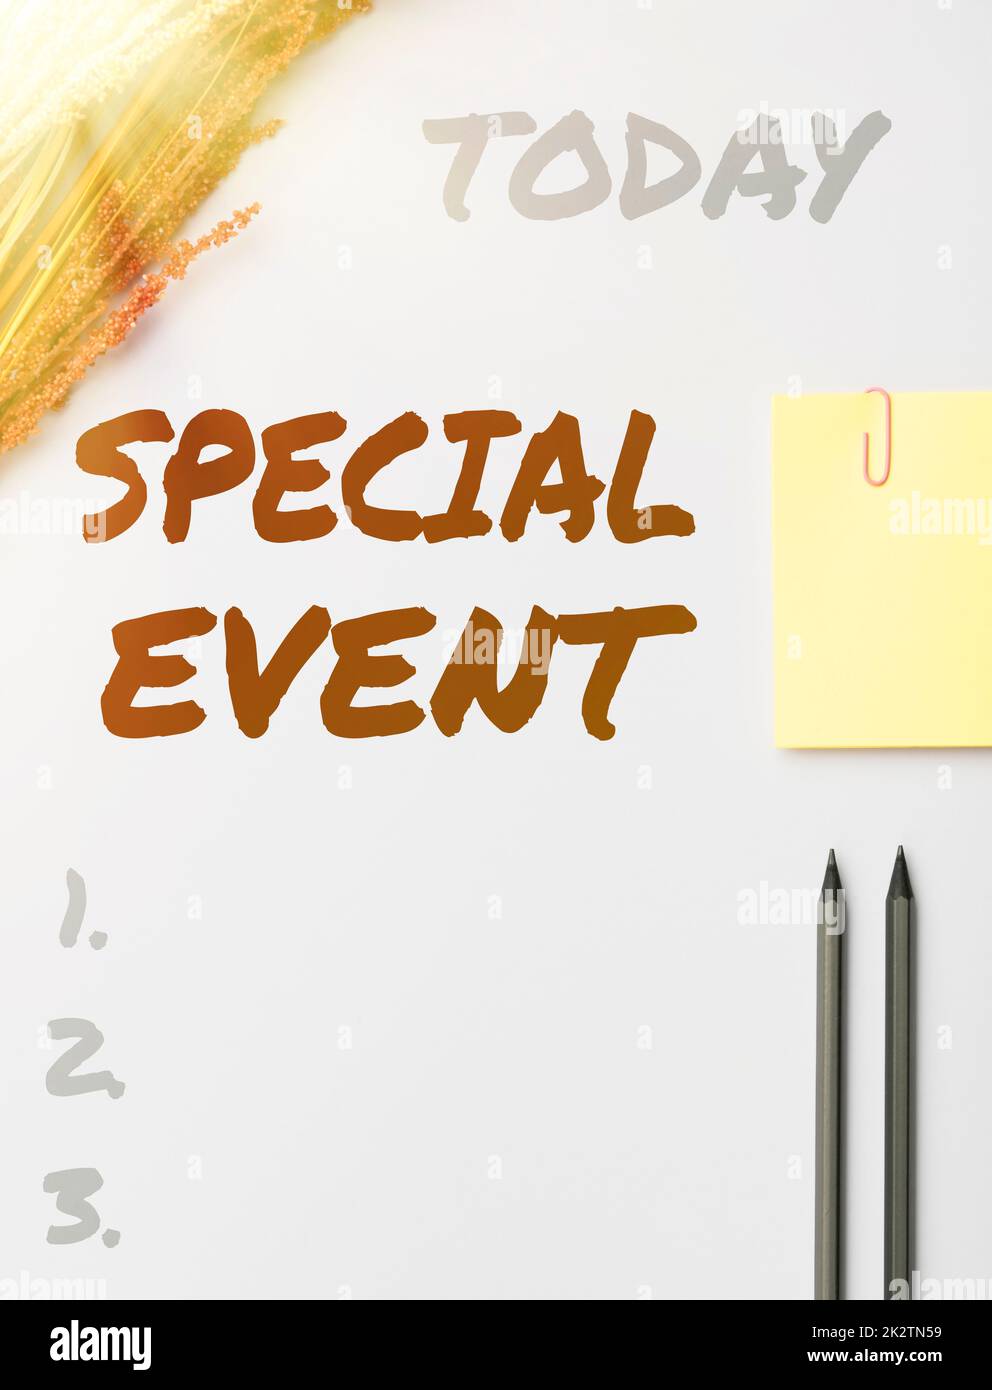 Text sign showing Special Event. Business approach Function to generate money for non profit a Crowded Occassion Flashy School Office Supplies, Teaching Learning Collections, Writing Tools Stock Photo